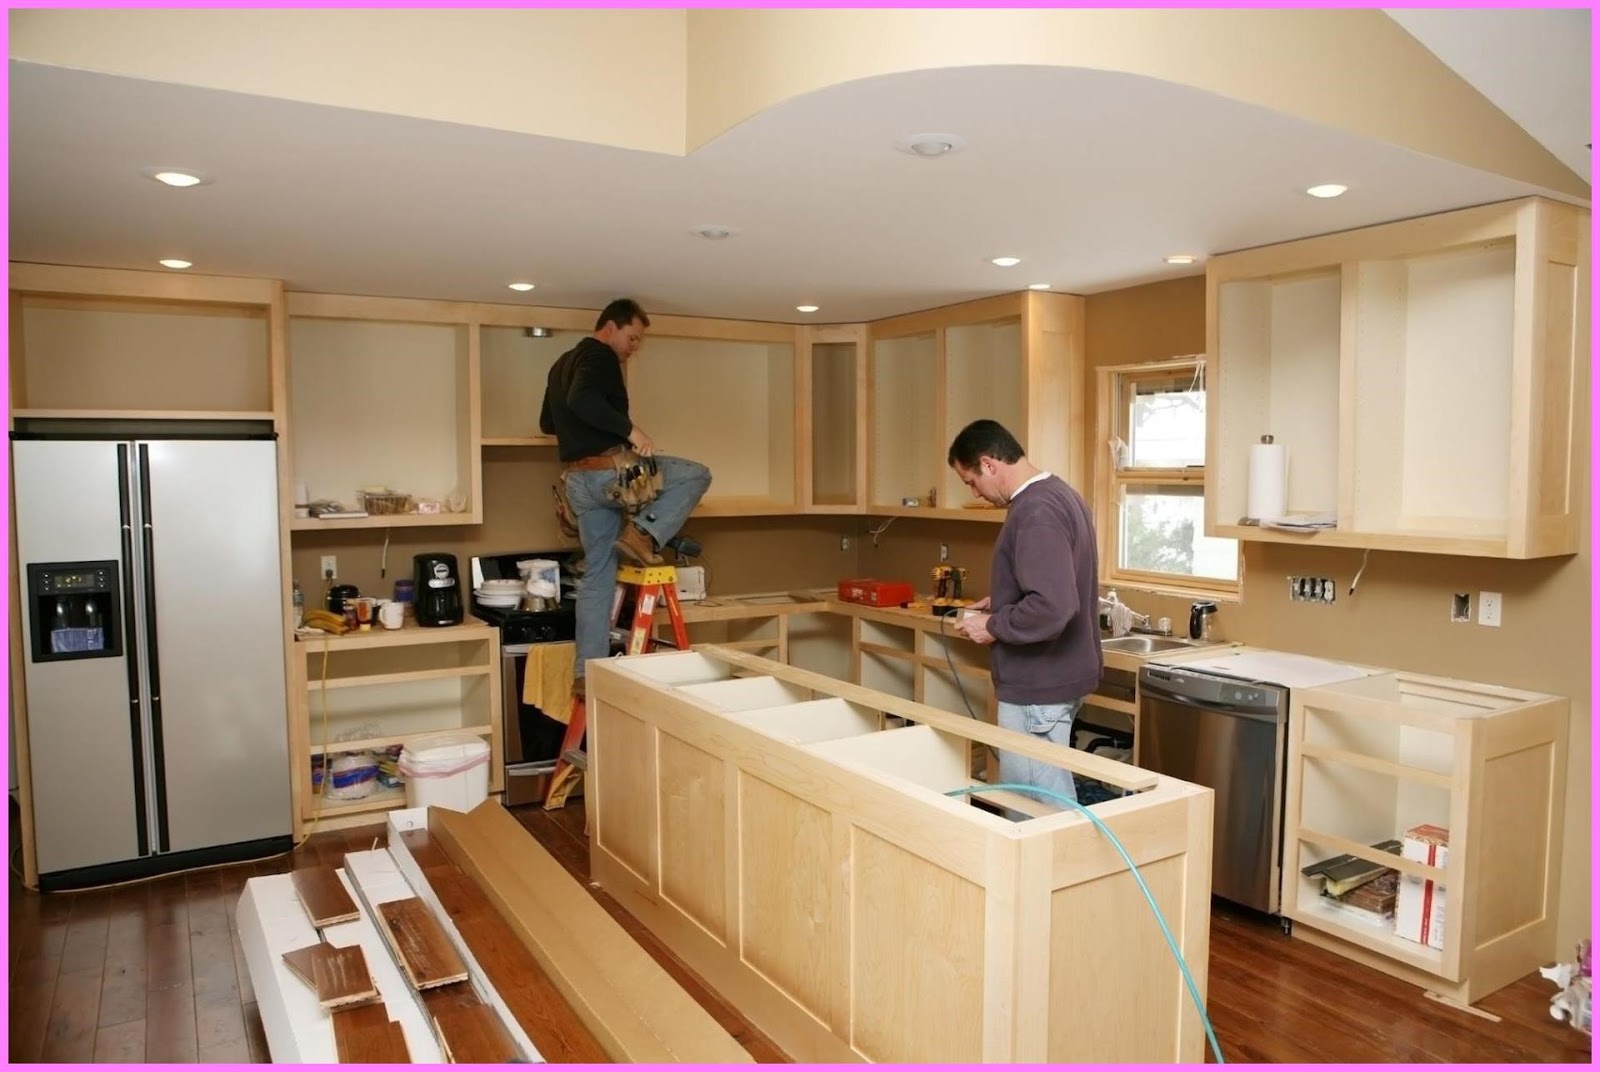 11 Standard Depth Of Kitchen Counter Counter Depth Refrigerator Dimensions Standard,Depth,Of,Kitchen,Counter